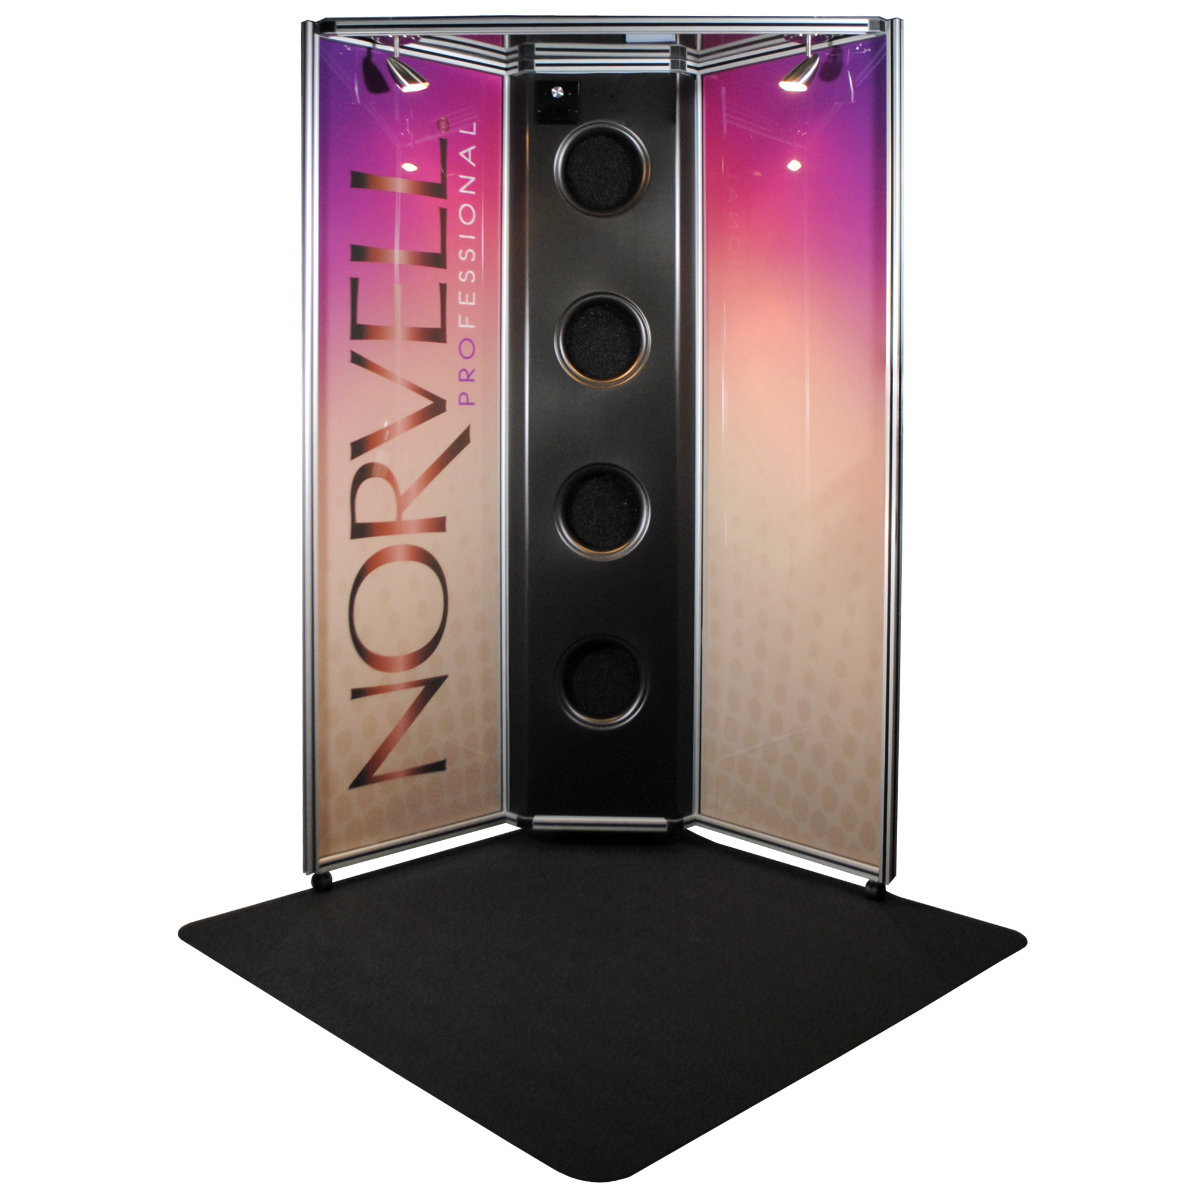 Norvell Overspray Booth with NEW Full Color Panels